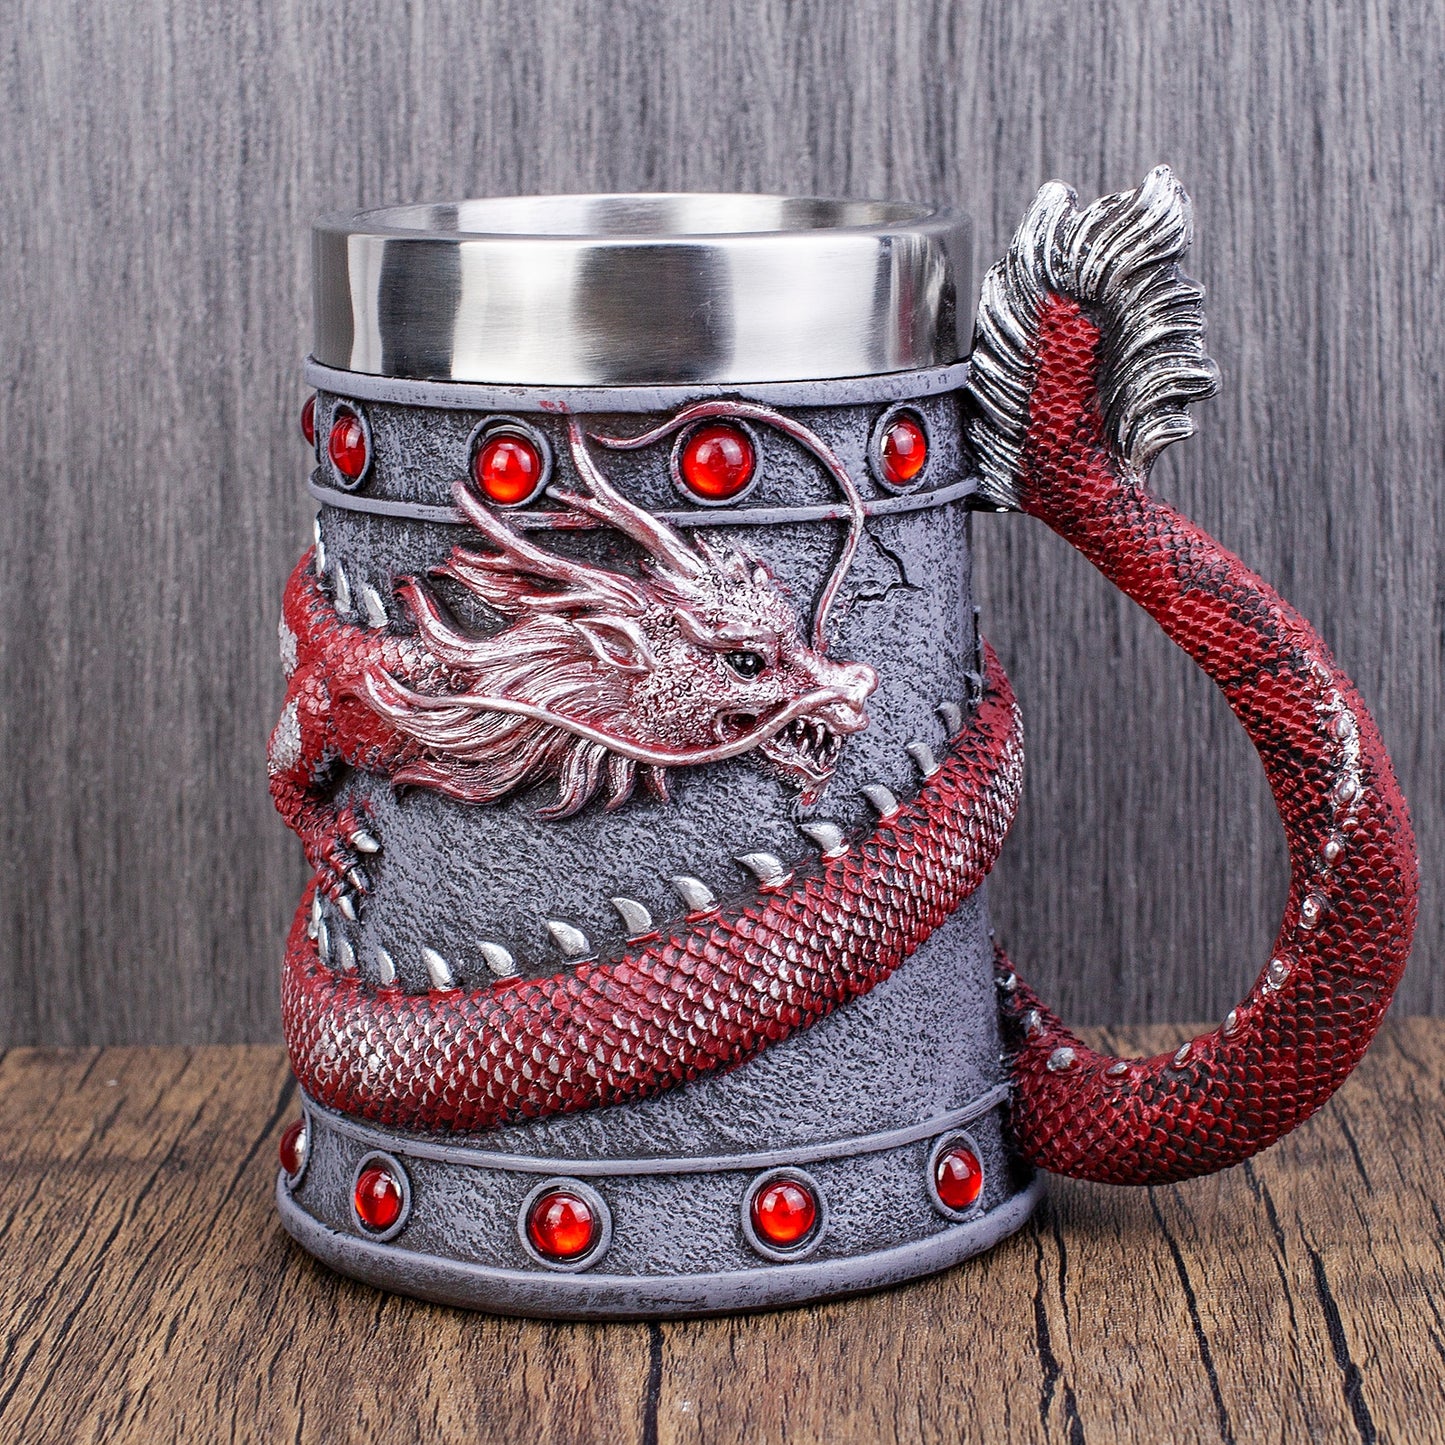 mighty dragon stainless beer tankard in red color